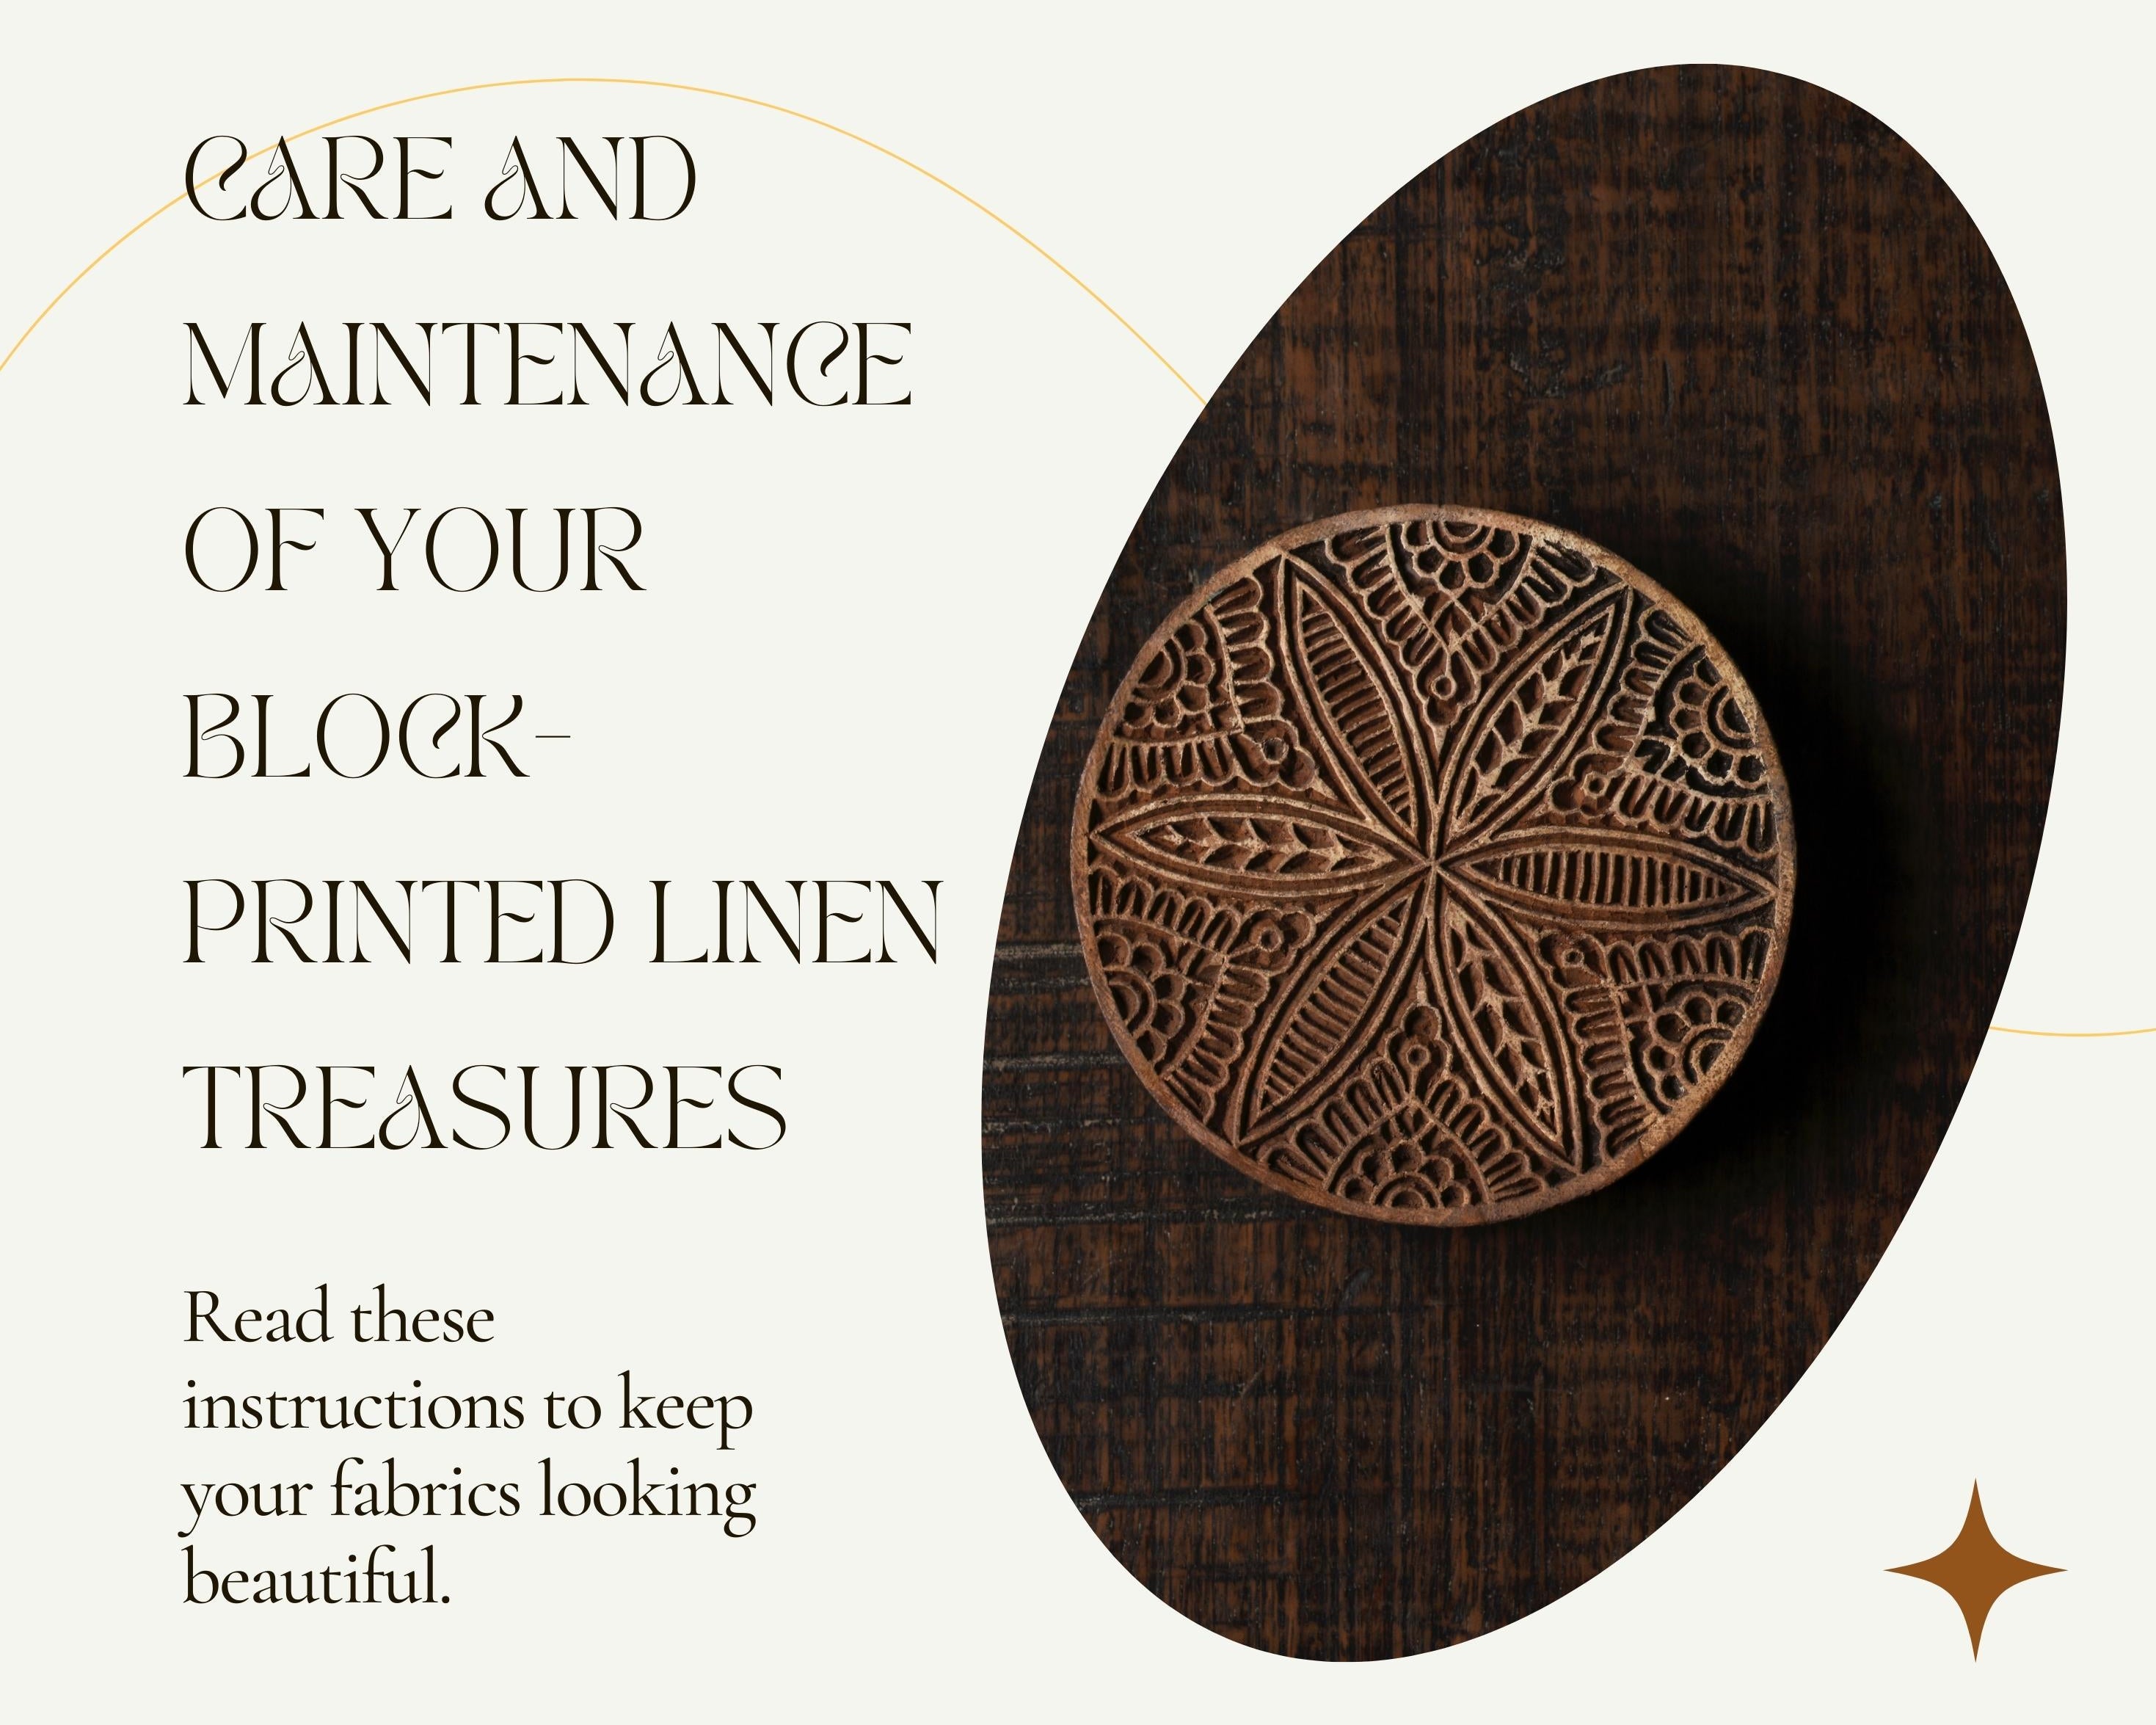 Care and Maintenance of Your Block-Printed Linen Treasures - Fabritual